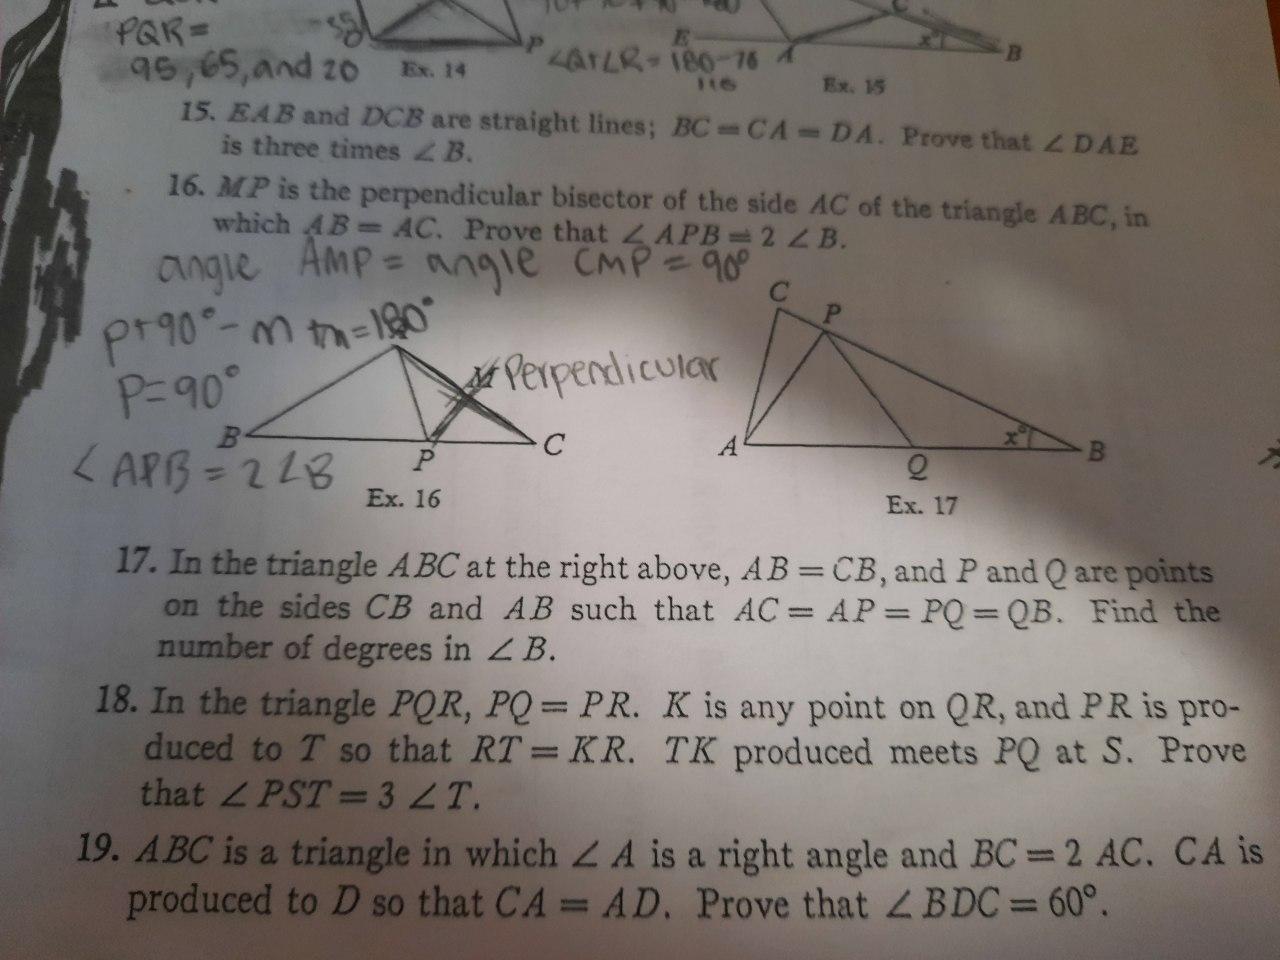 In The Triangle ABC At The Right Above, AB=CB, And P And Q Are Points On The Sides CB And AB Such That